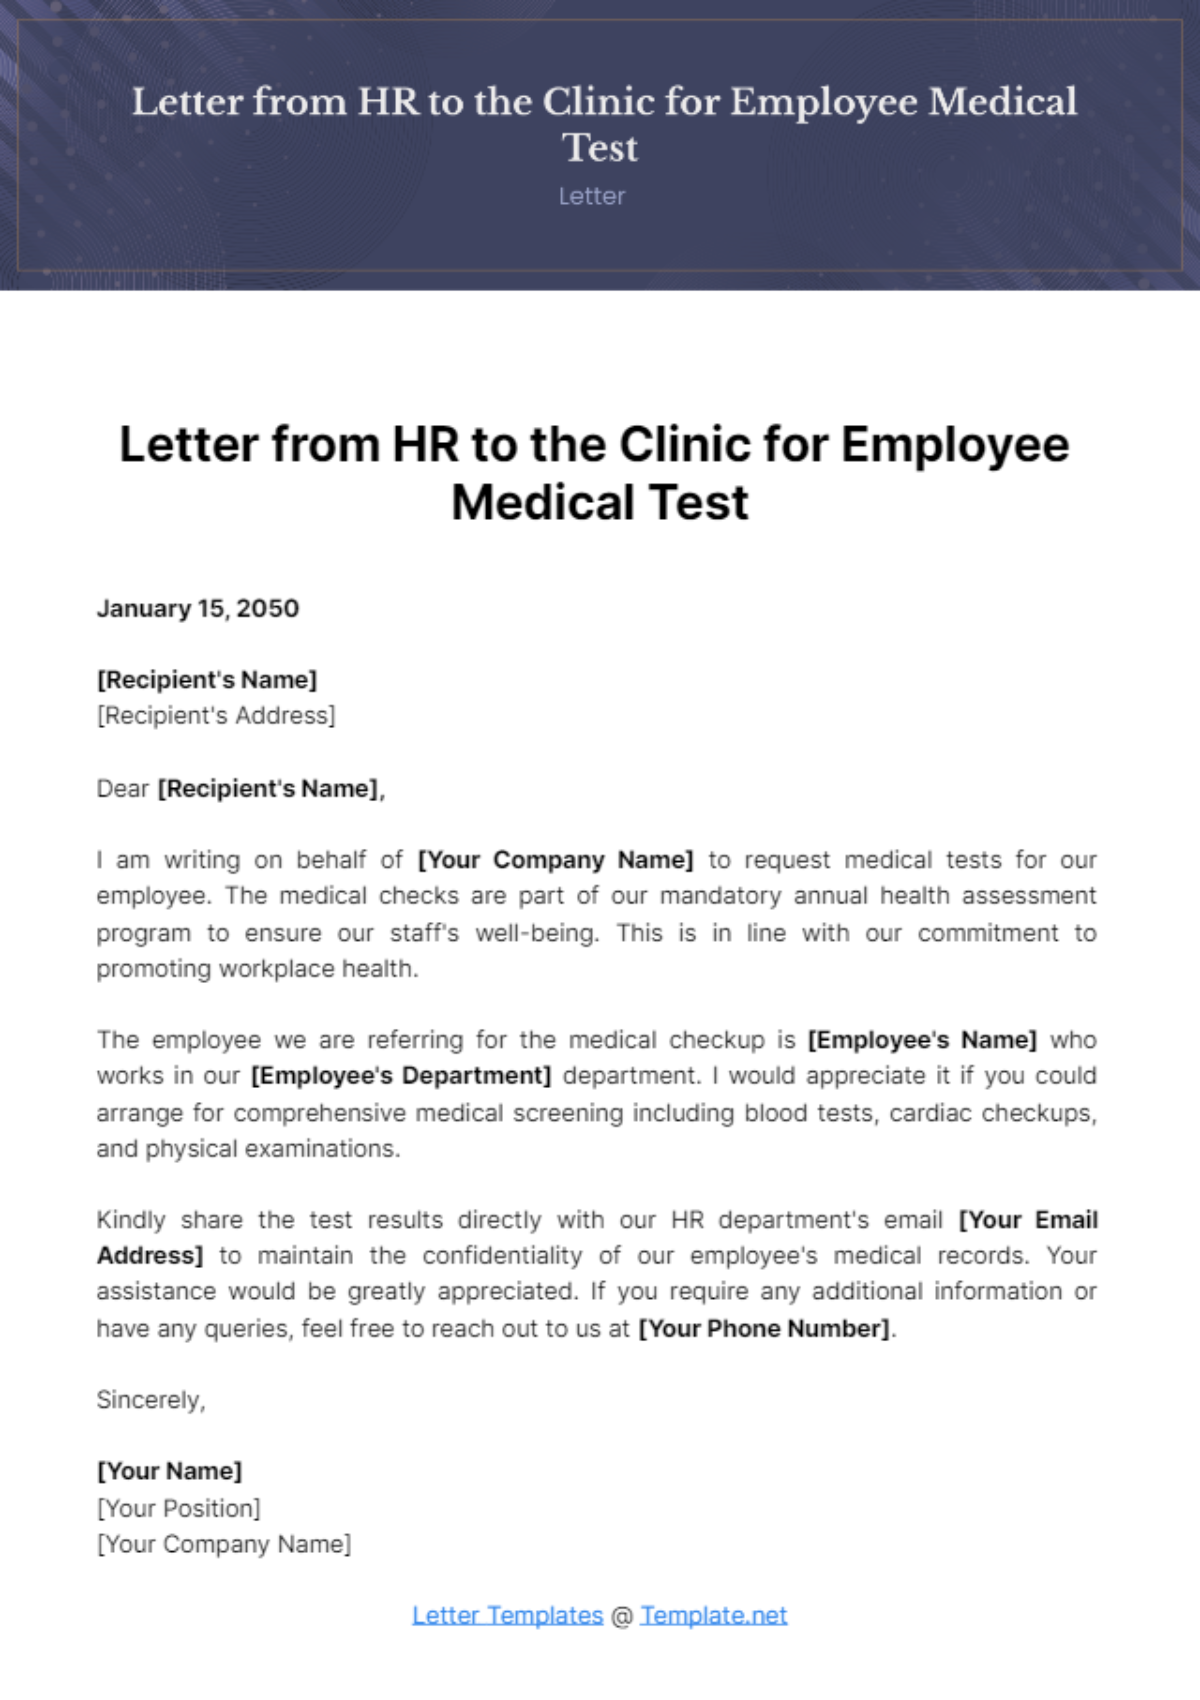 Free Letter from HR to the Clinic for Employee Medical Test Template